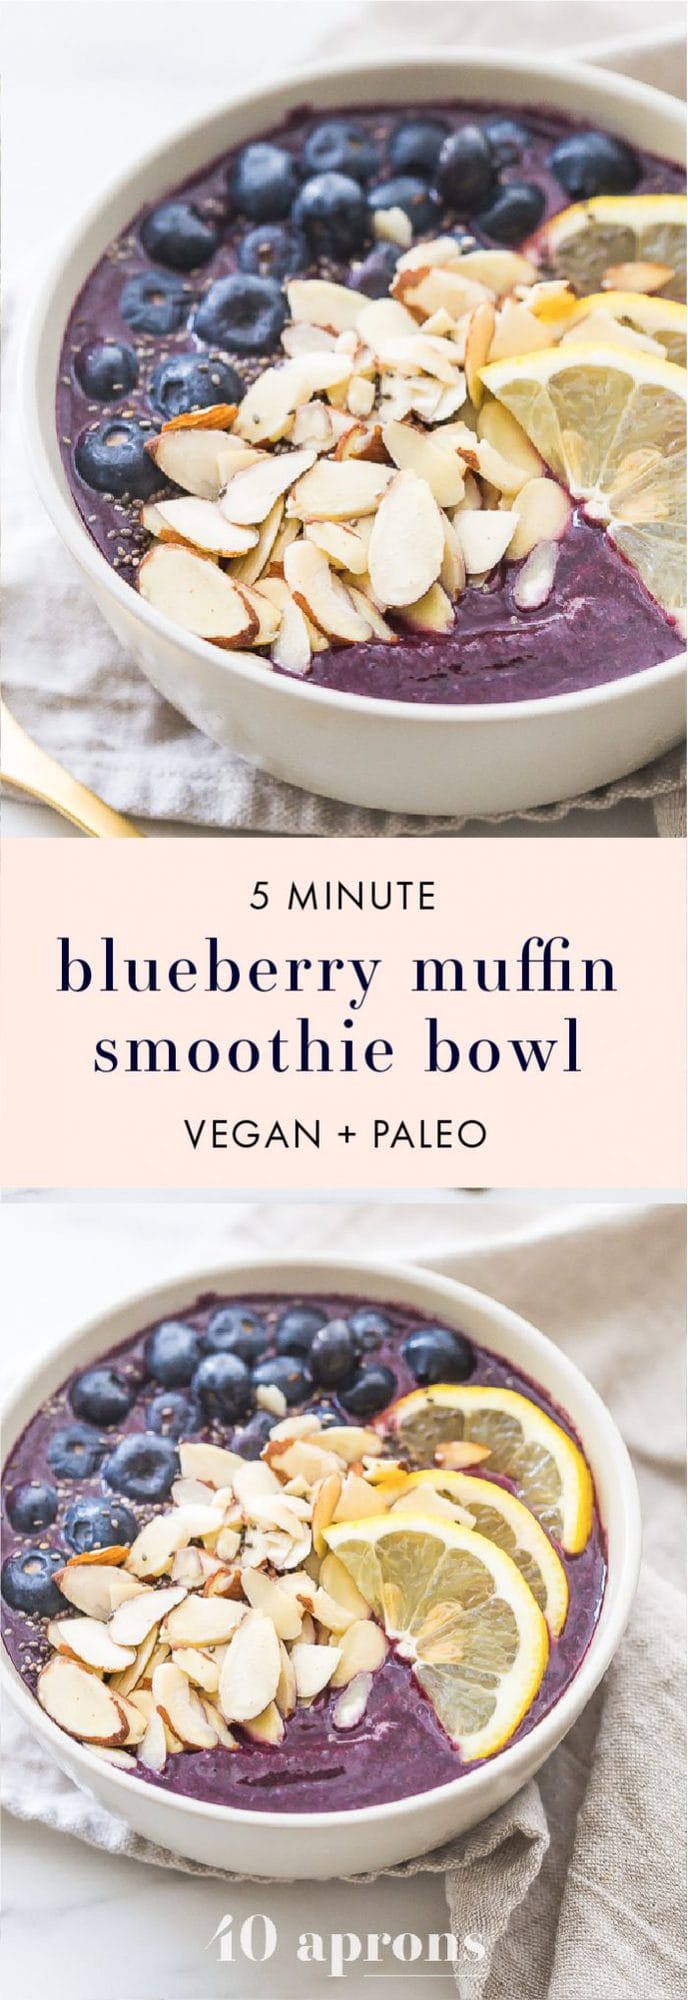 This blueberry muffin smoothie bowl is sweet with a touch of lemon and vanilla, just like a blueberry muffin! This blueberry smoothie bowl takes only 5 minutes and is paleo and vegan. With only 5 ingredients, you'll get addicted to this blueberry muffin smoothie bowl! You'll love this vegan smoothie bowl (or is it a paleo smoothie bowl? Or maybe just an easy smoothie bowl?! You decide)!